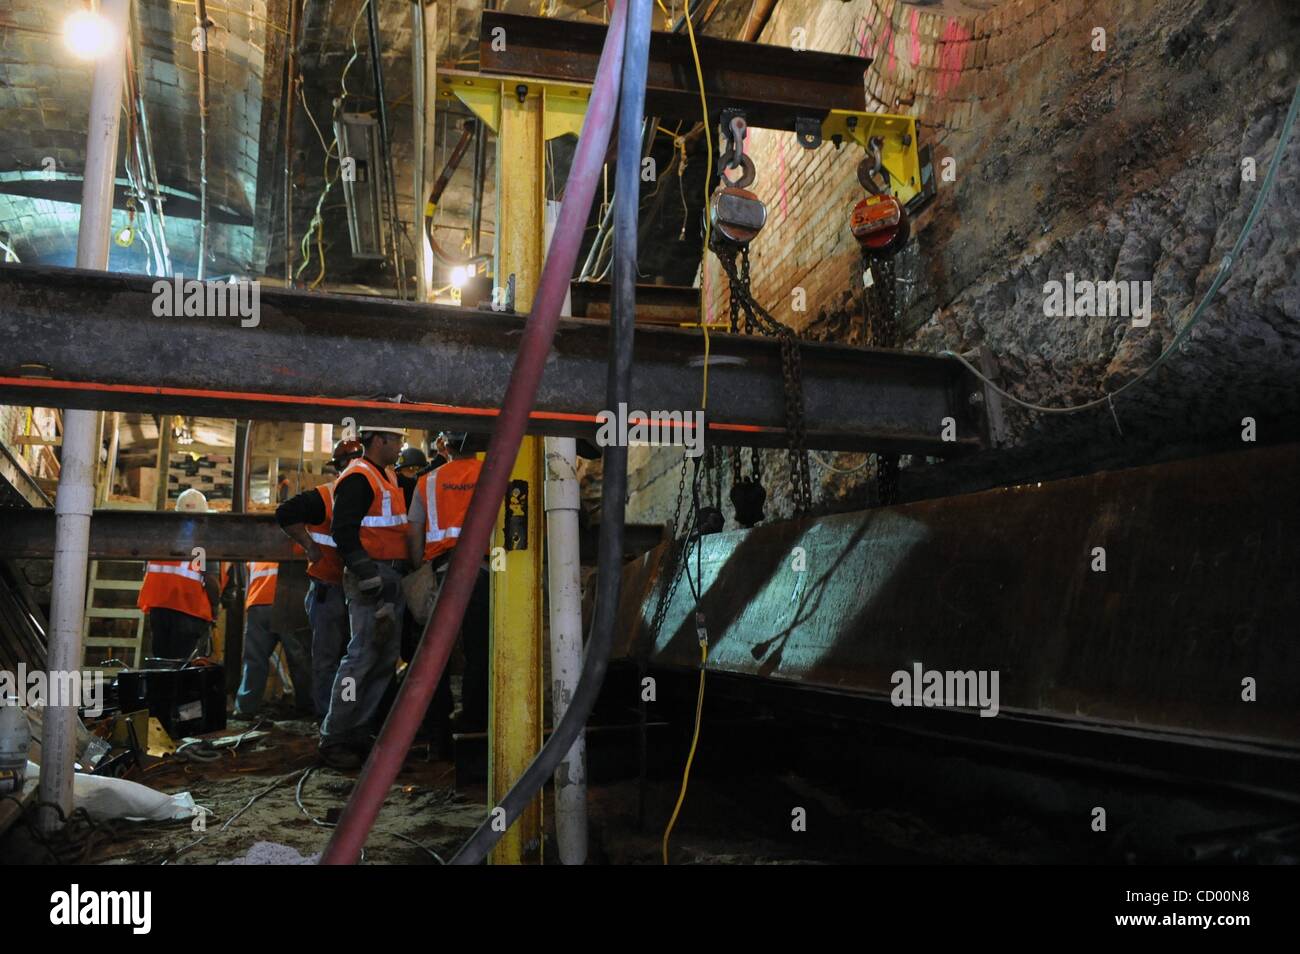 Apr 16, 2010 - Manhattan, New York, USA - Construction of an escalator shaft beneath the building at 8 John Street as the Metropolitan Transportation Authority (MTA) continues construction on the Fulton Street Transit Center, improving connections to six Lower Manhattan subway stations near the Worl Stock Photo